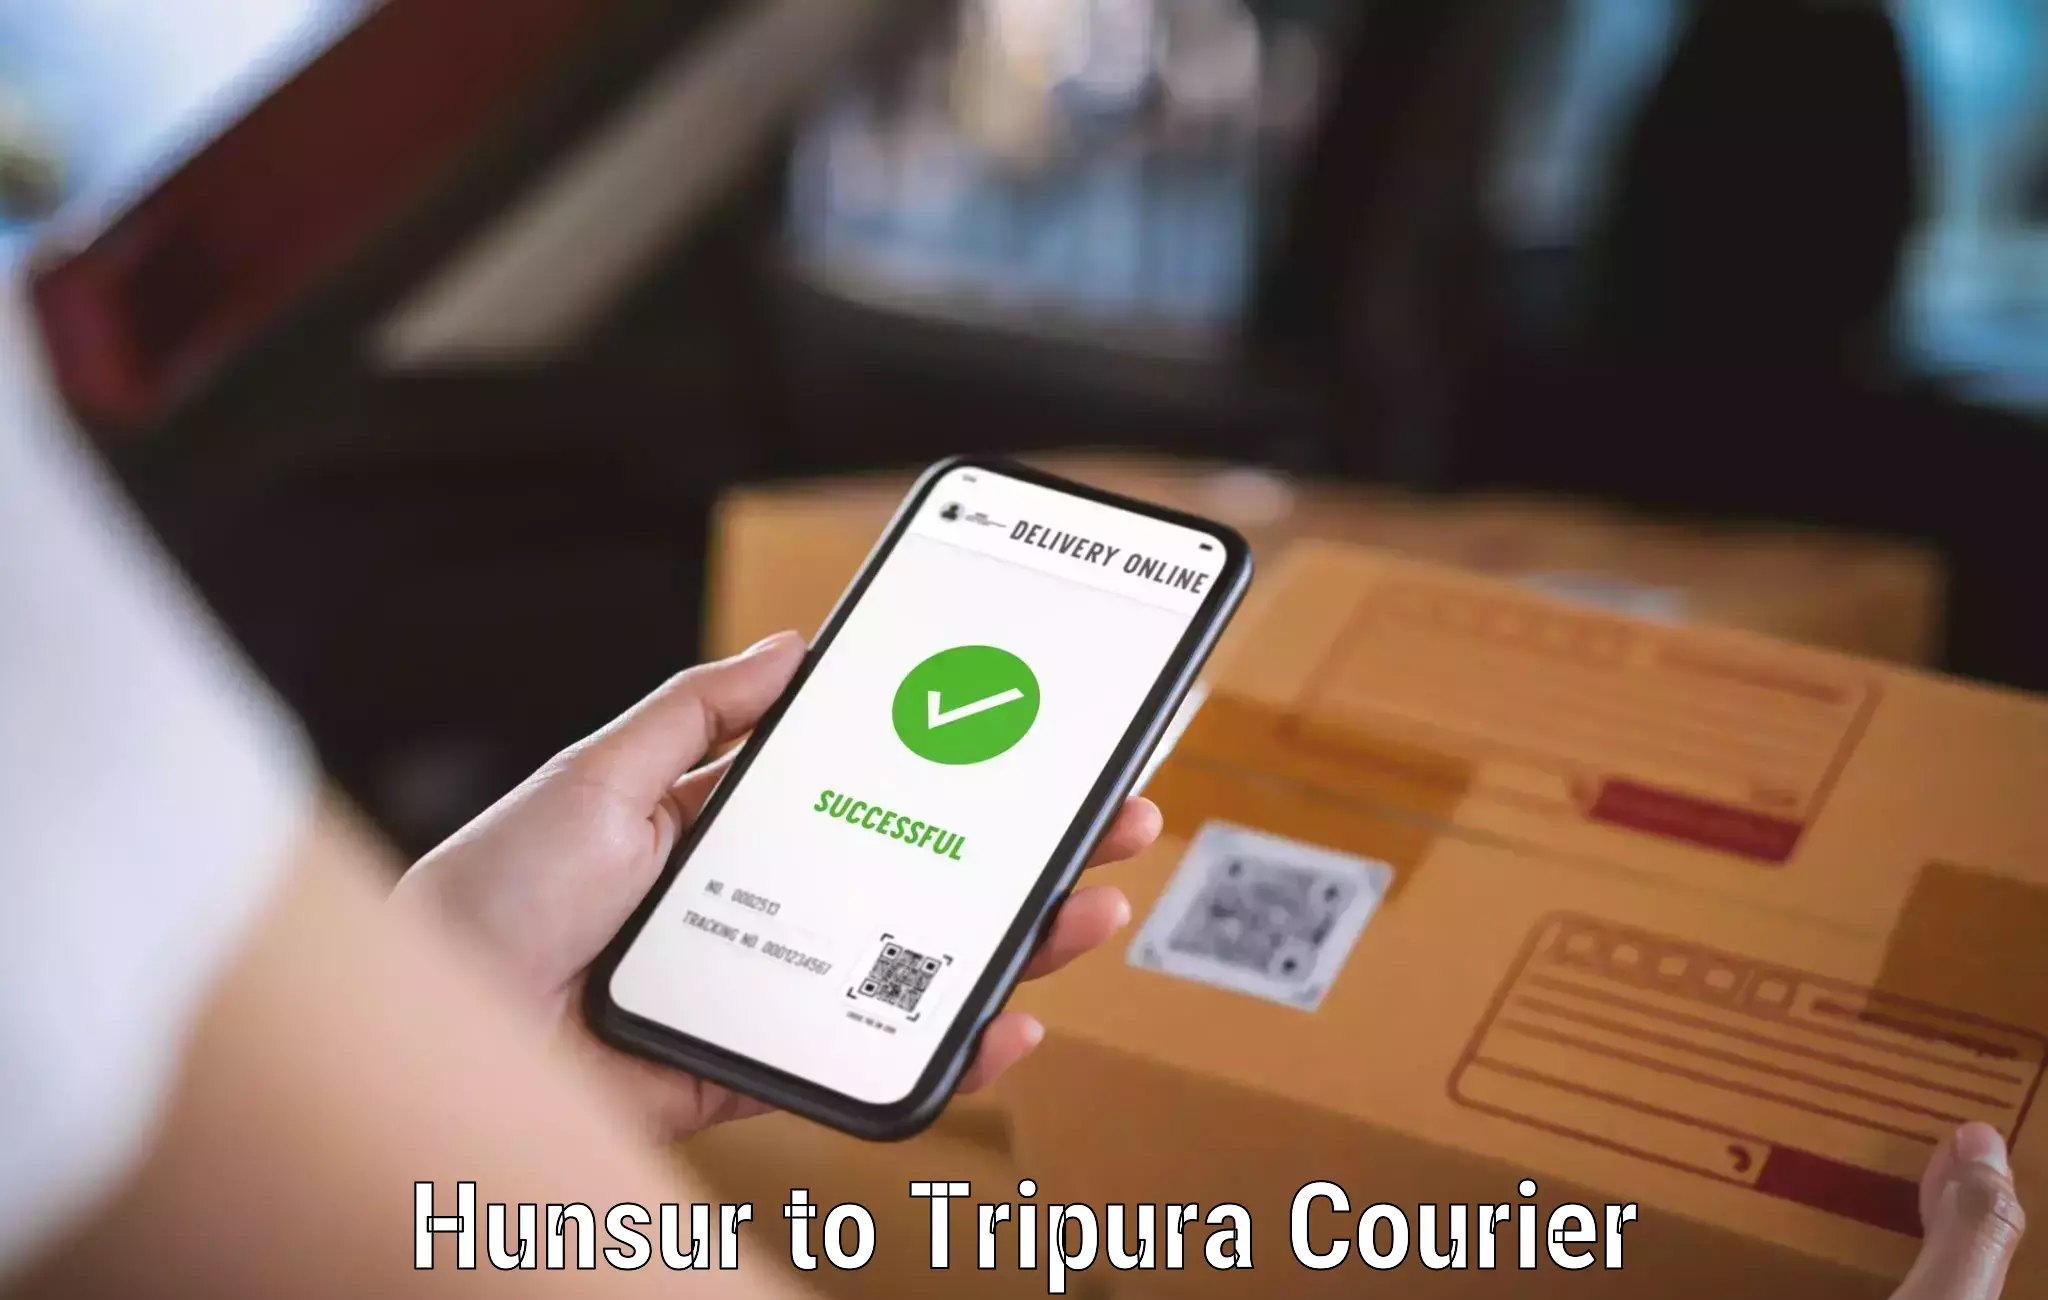 Large-scale shipping solutions Hunsur to Udaipur Tripura